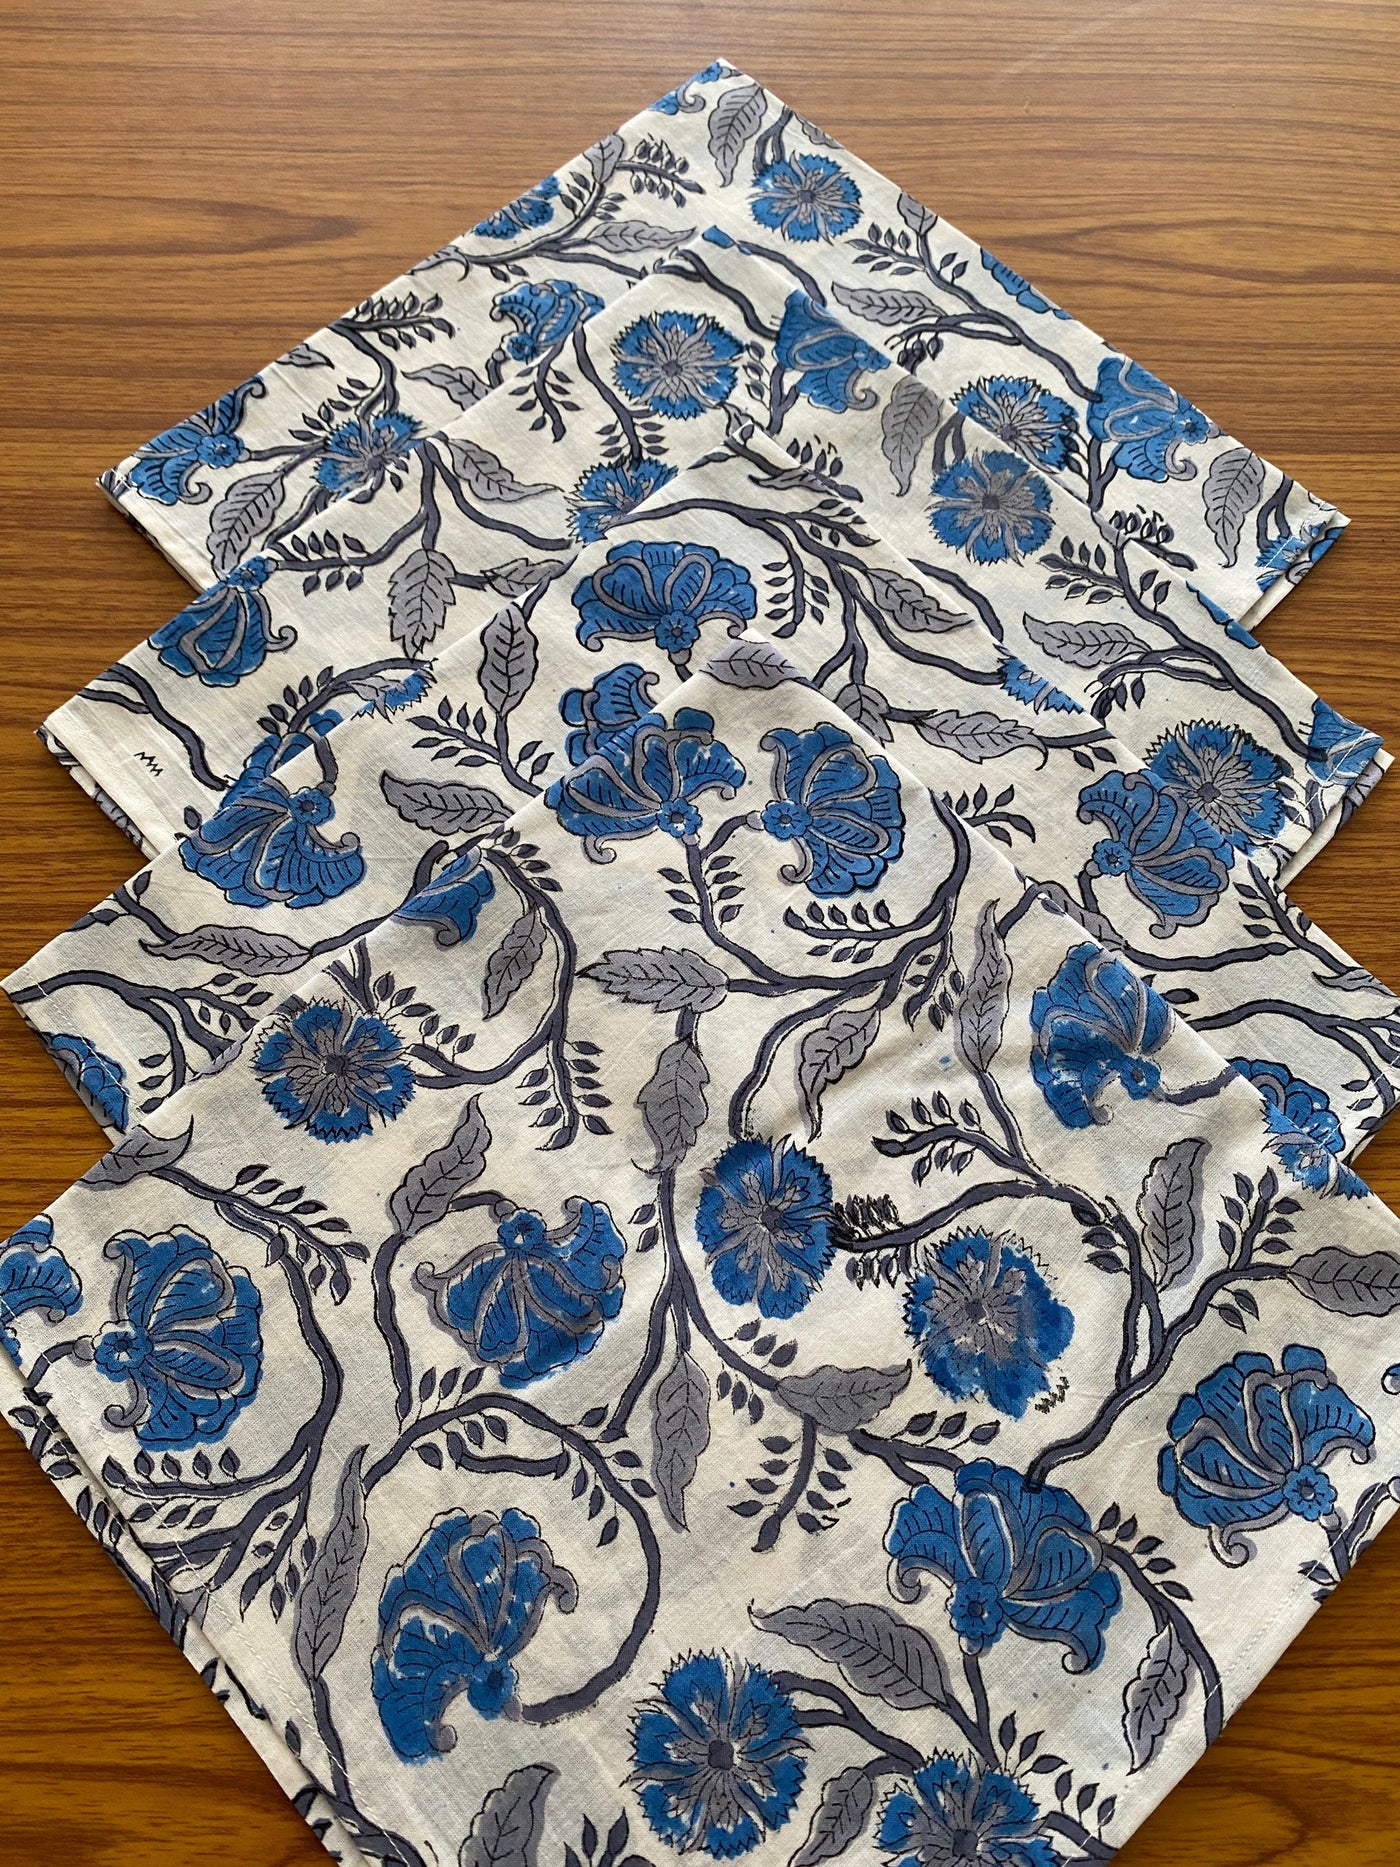 Aqua and Pigeon Blue Floral Indian Hand Block Printed 100% Pure Cotton Cloth Napkins, Christmas Gifts, Set of 6 Dinner napkins 18x18"